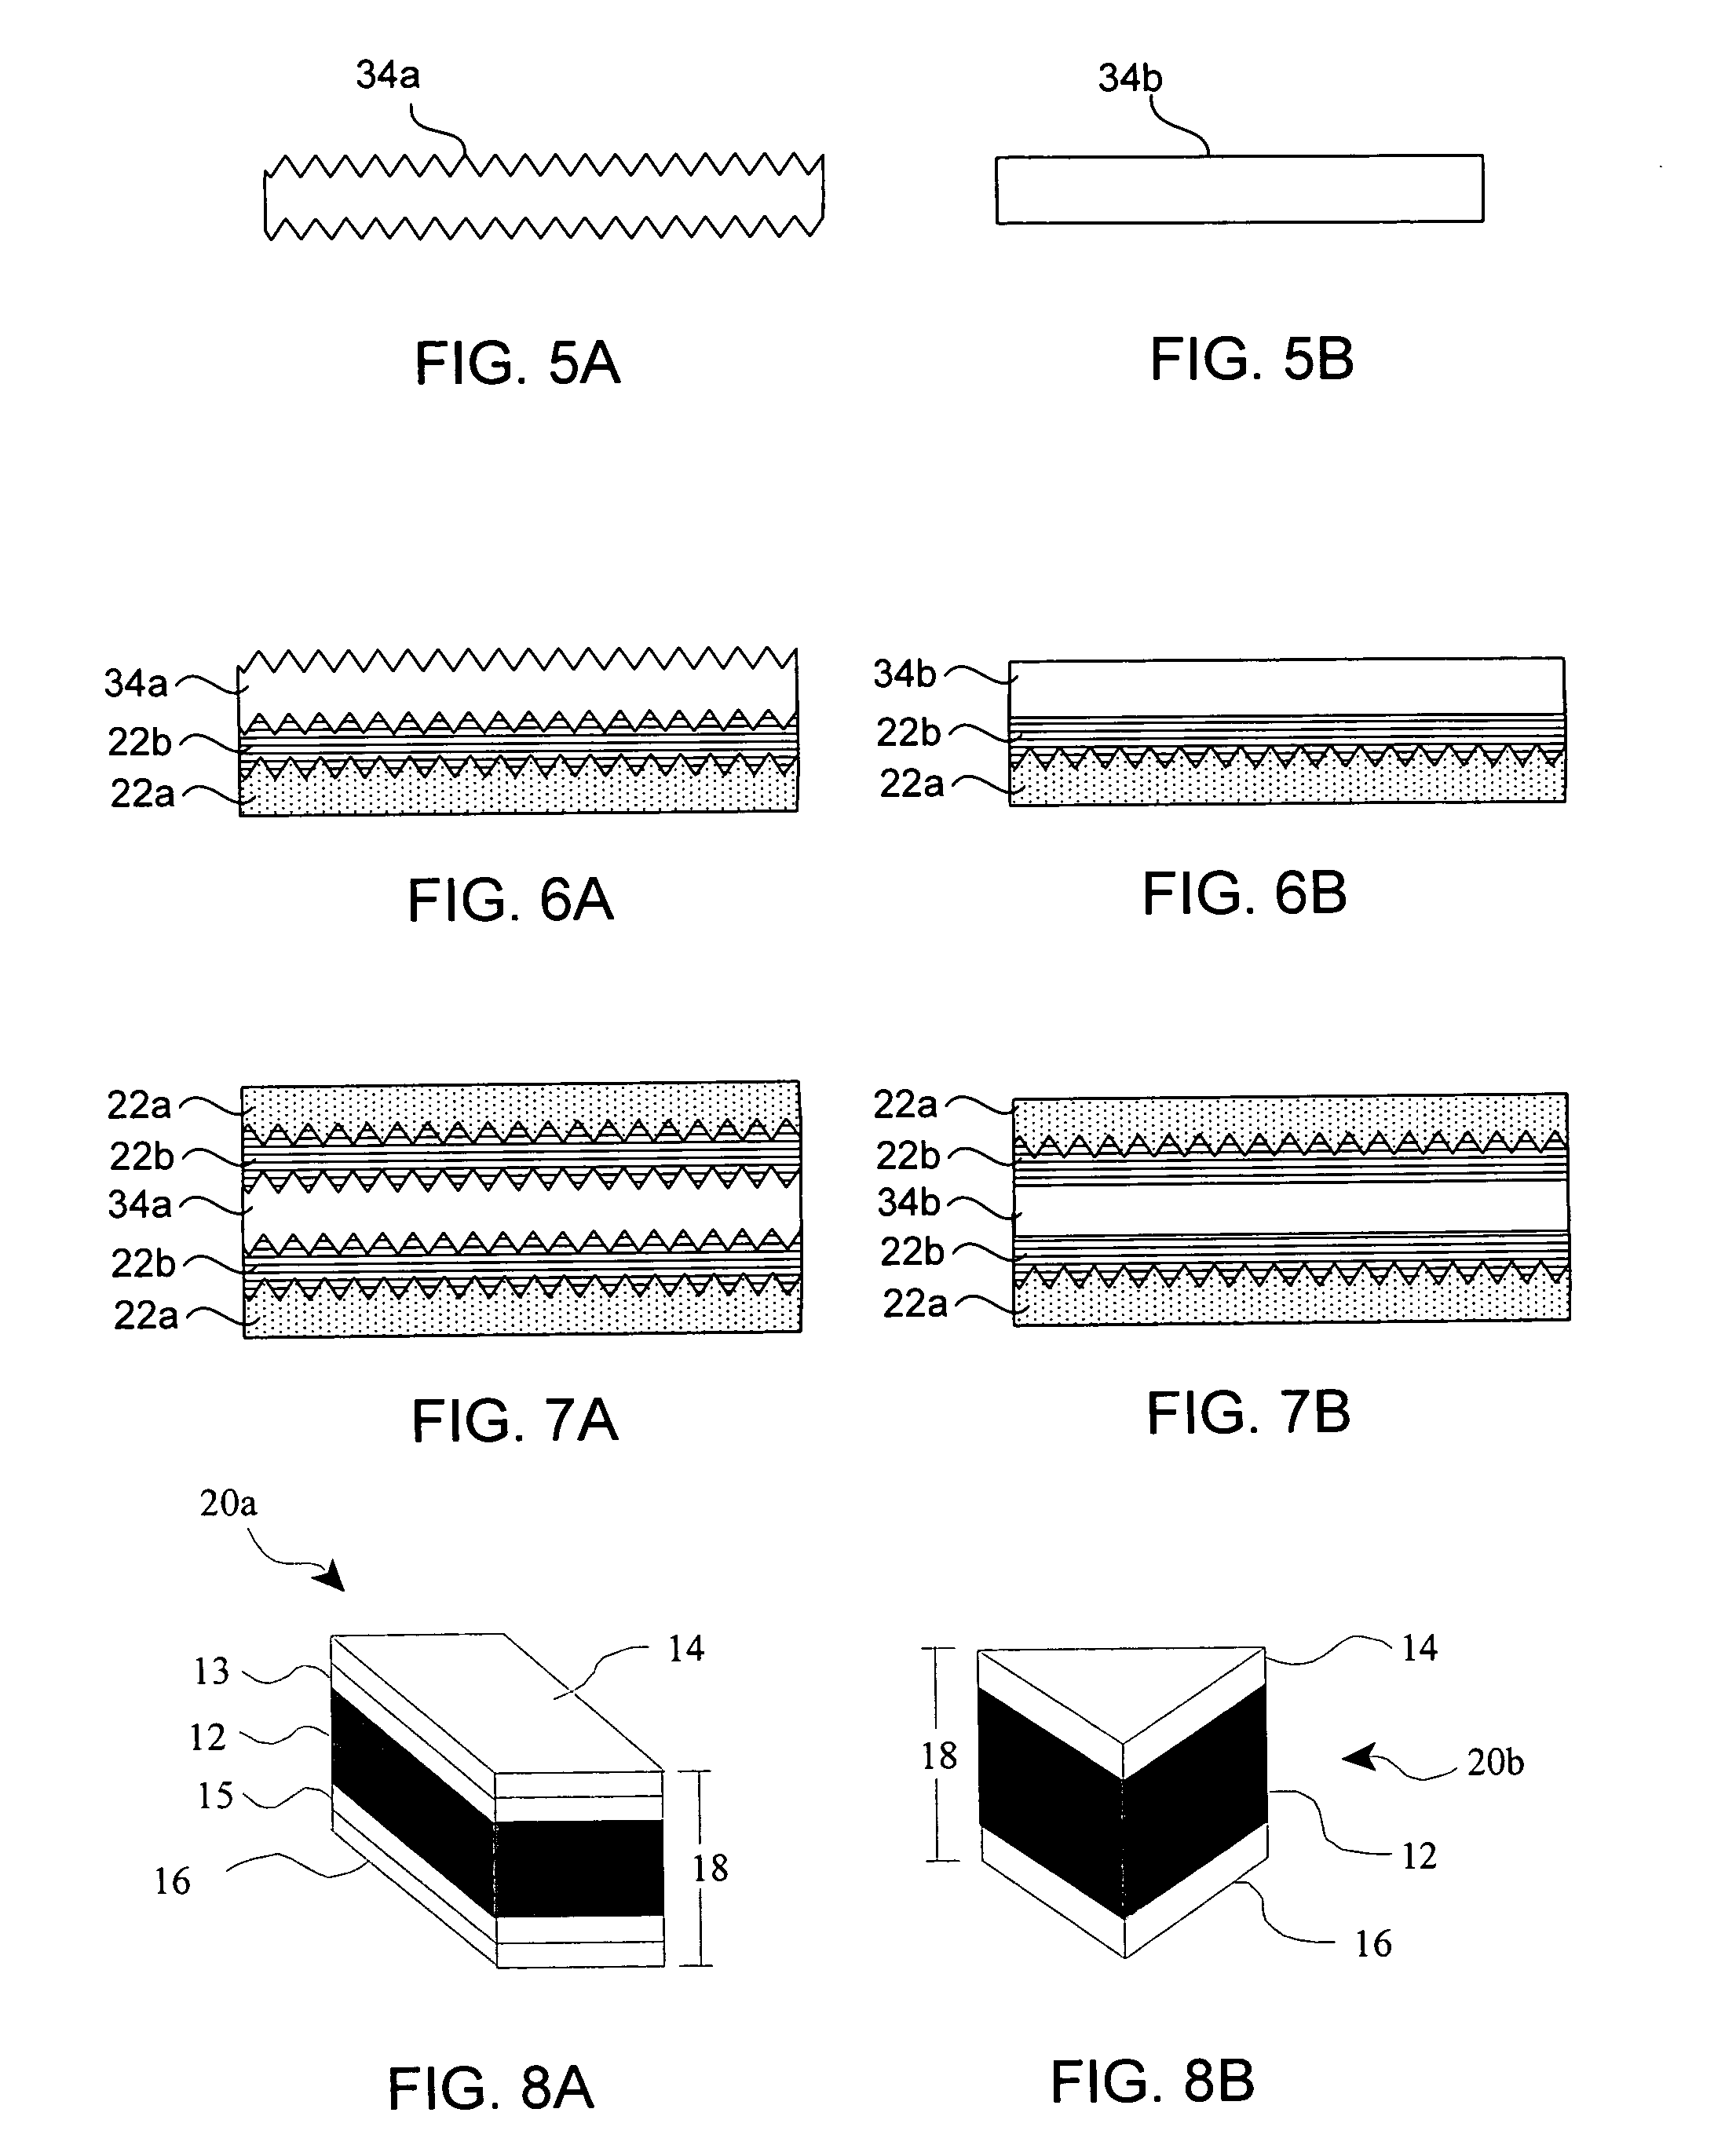 Doubled-sided and multi-layered PCBN and PCD abrasive articles